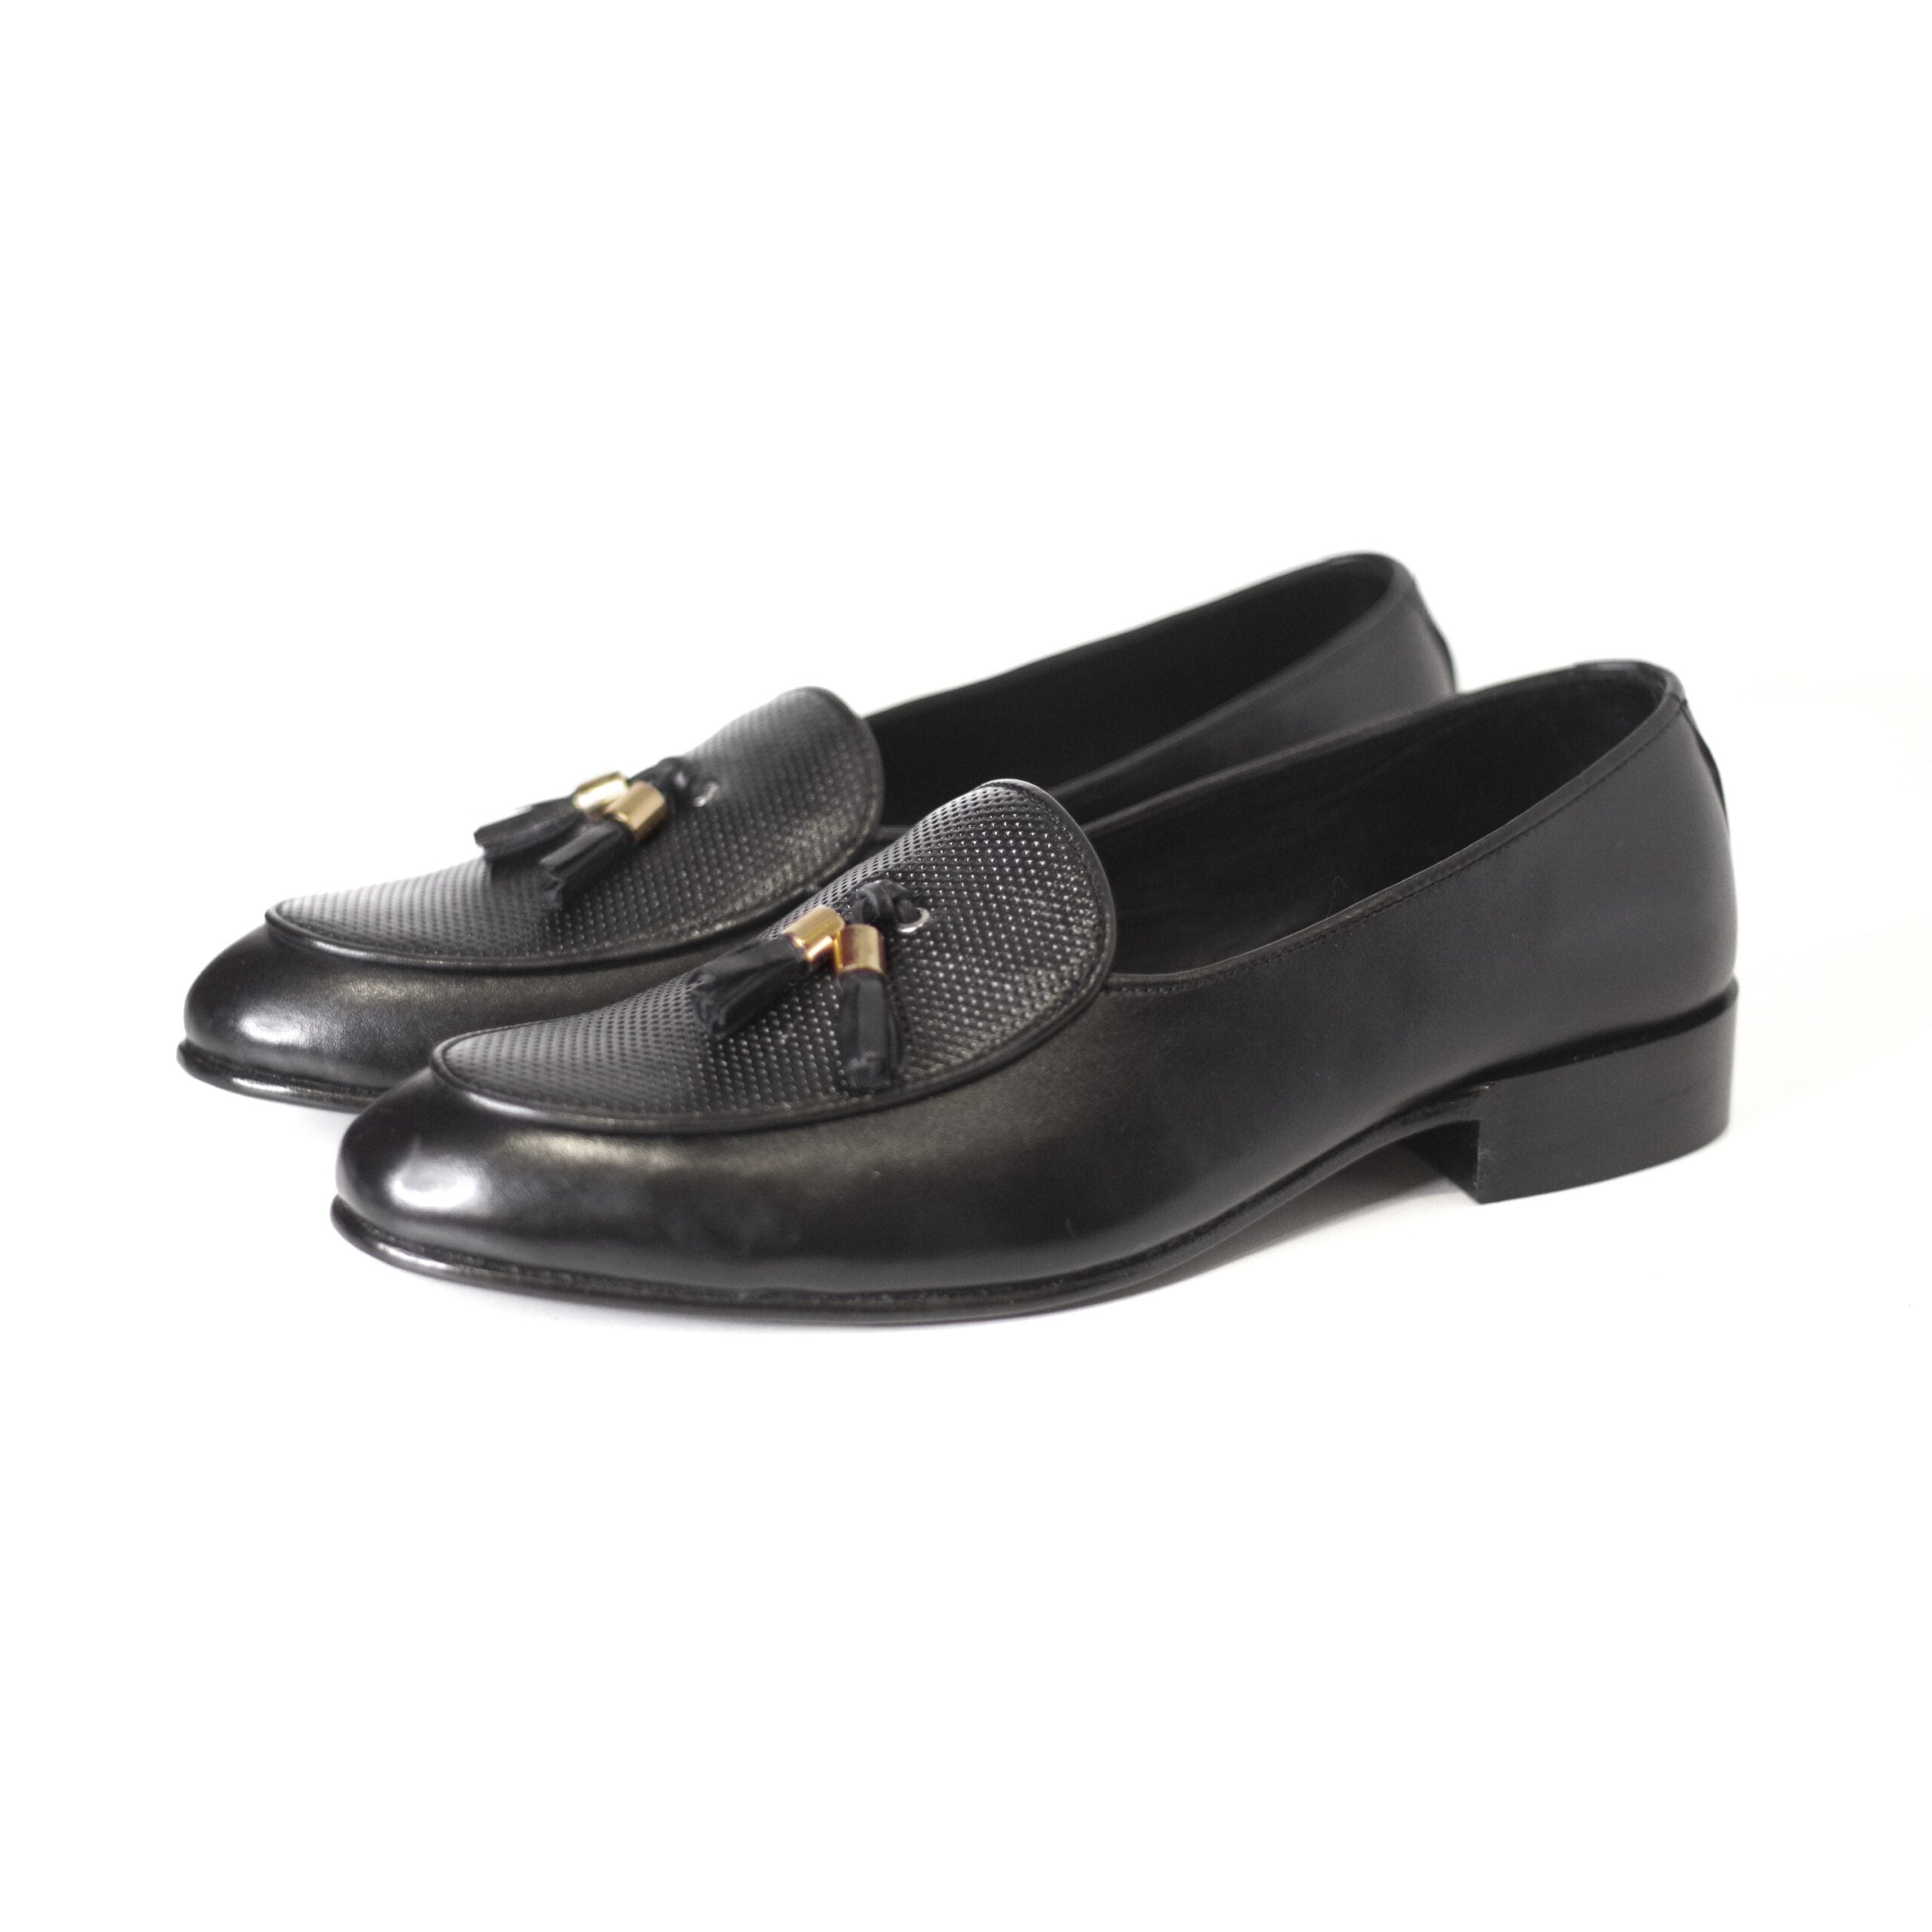 Black Sleek Sophistication With Playful Tassels Hand-Crafted Visionary Loafers/Shoes For Men